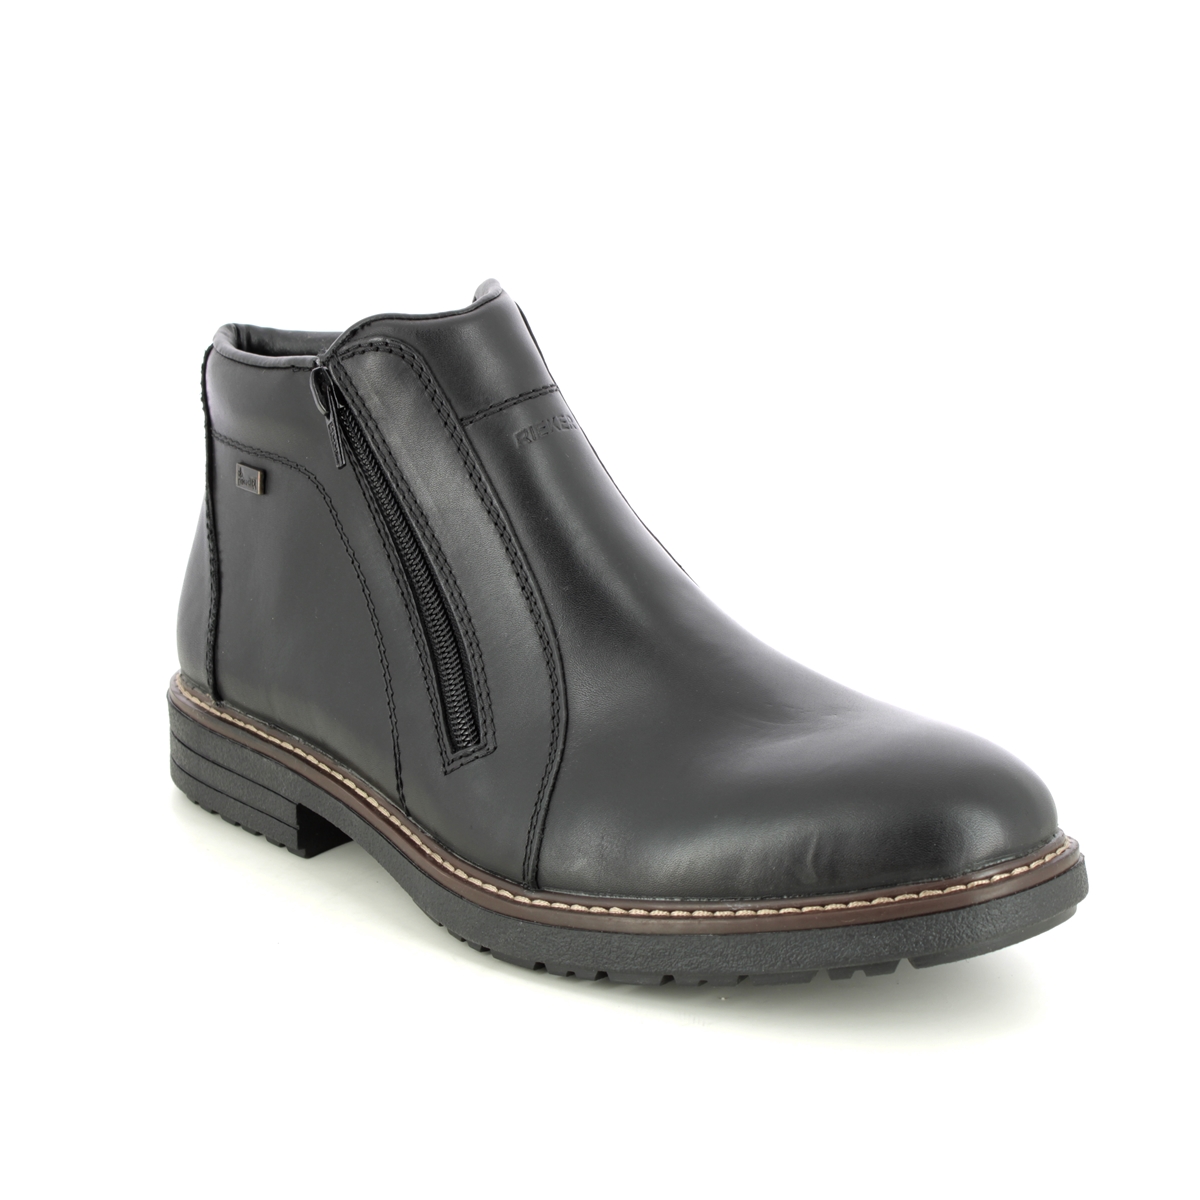 Rieker 33160-00 leather Winter Boots